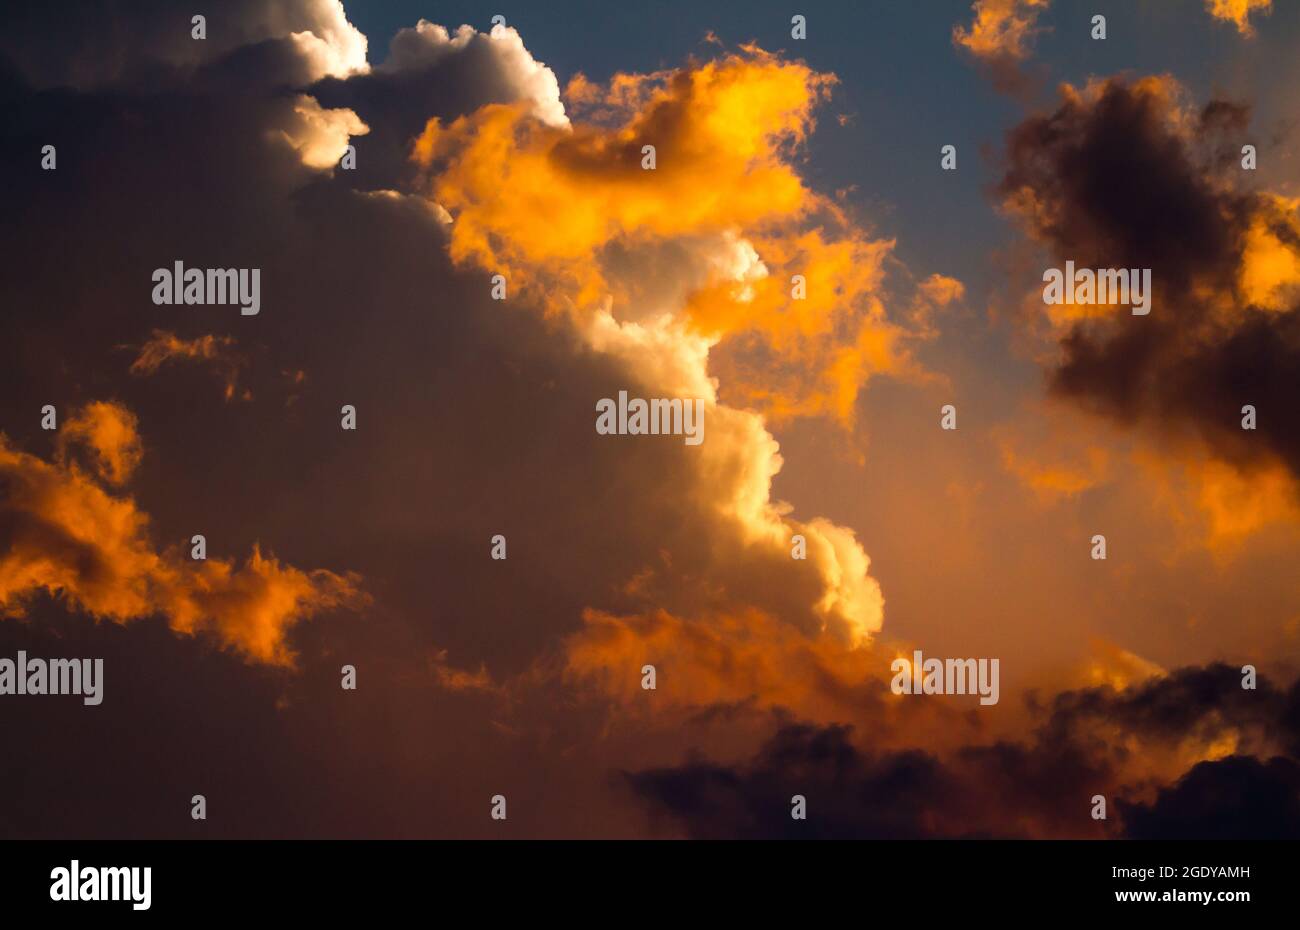 The setting sun bathes gathering storm clouds in a dramatic orange glow. Stock Photo